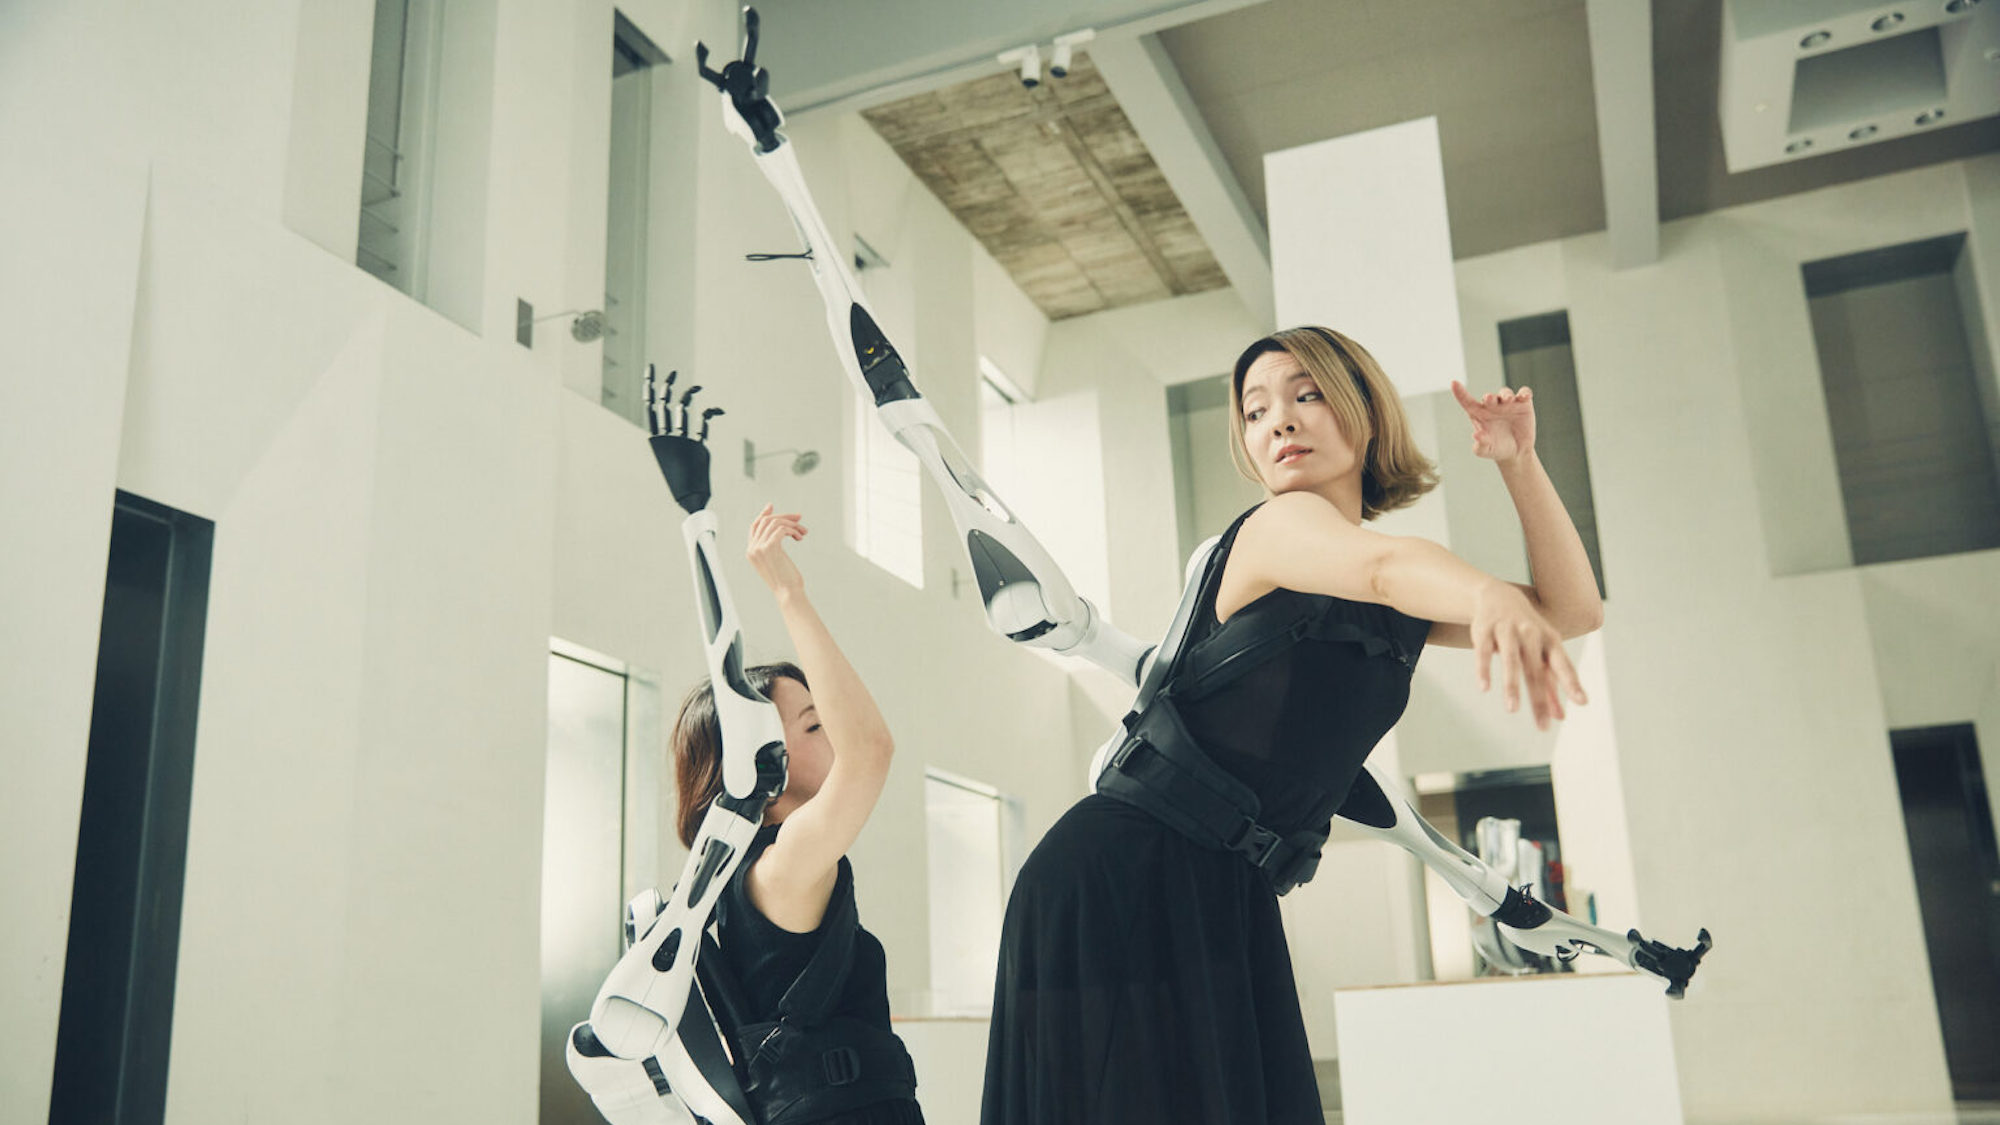 These wearable cyborg arms were modeled after Japanese horror fiction and puppets